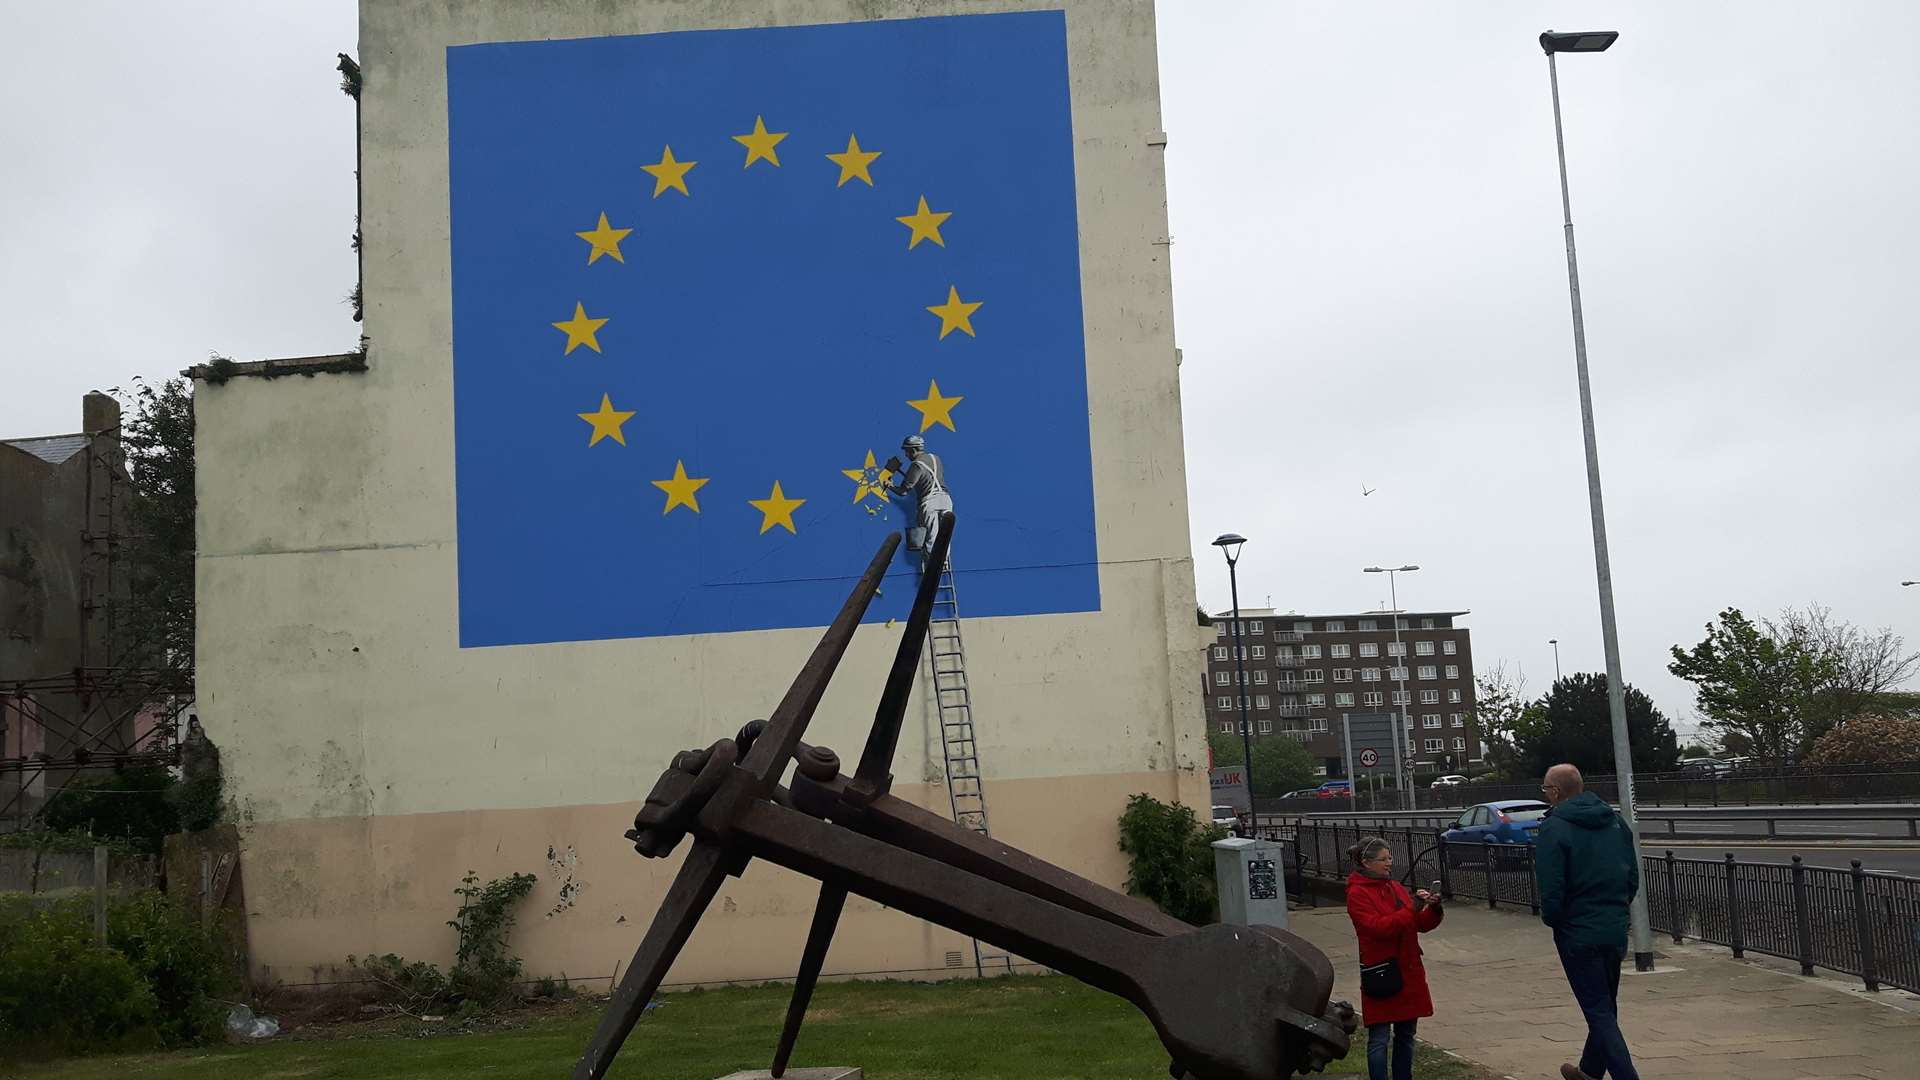 Elusive artist Banksy crept into Dover and painted a Brexit themed mural last Sunday